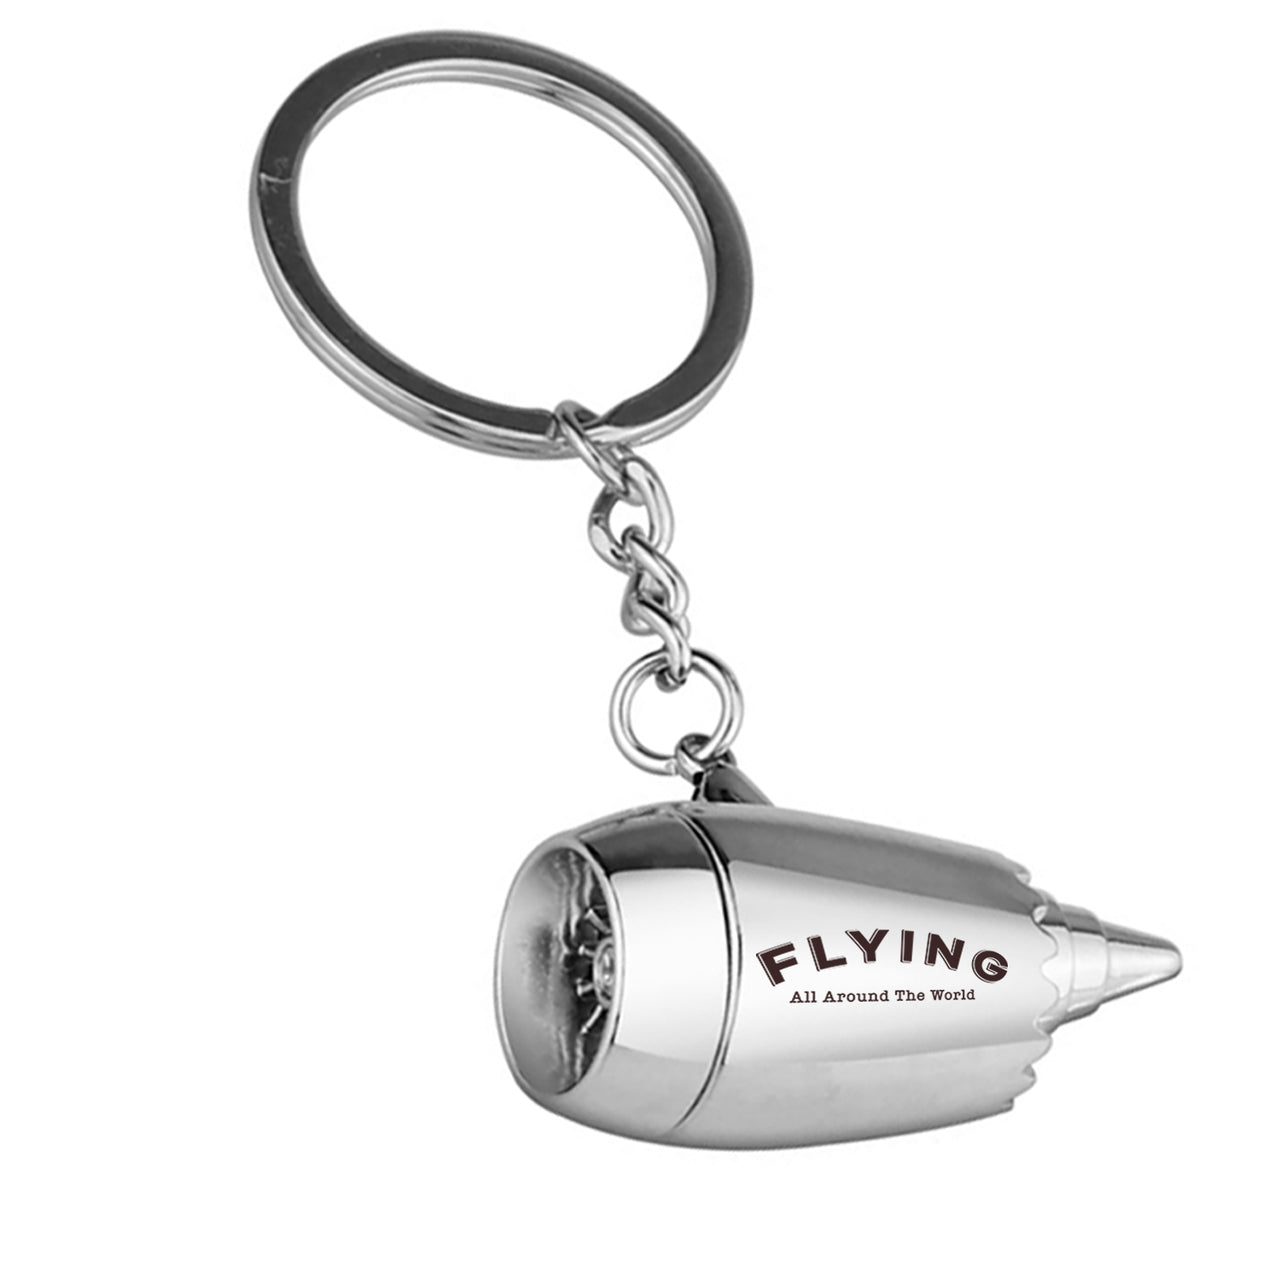 Flying All Around The World Designed Airplane Jet Engine Shaped Key Chain